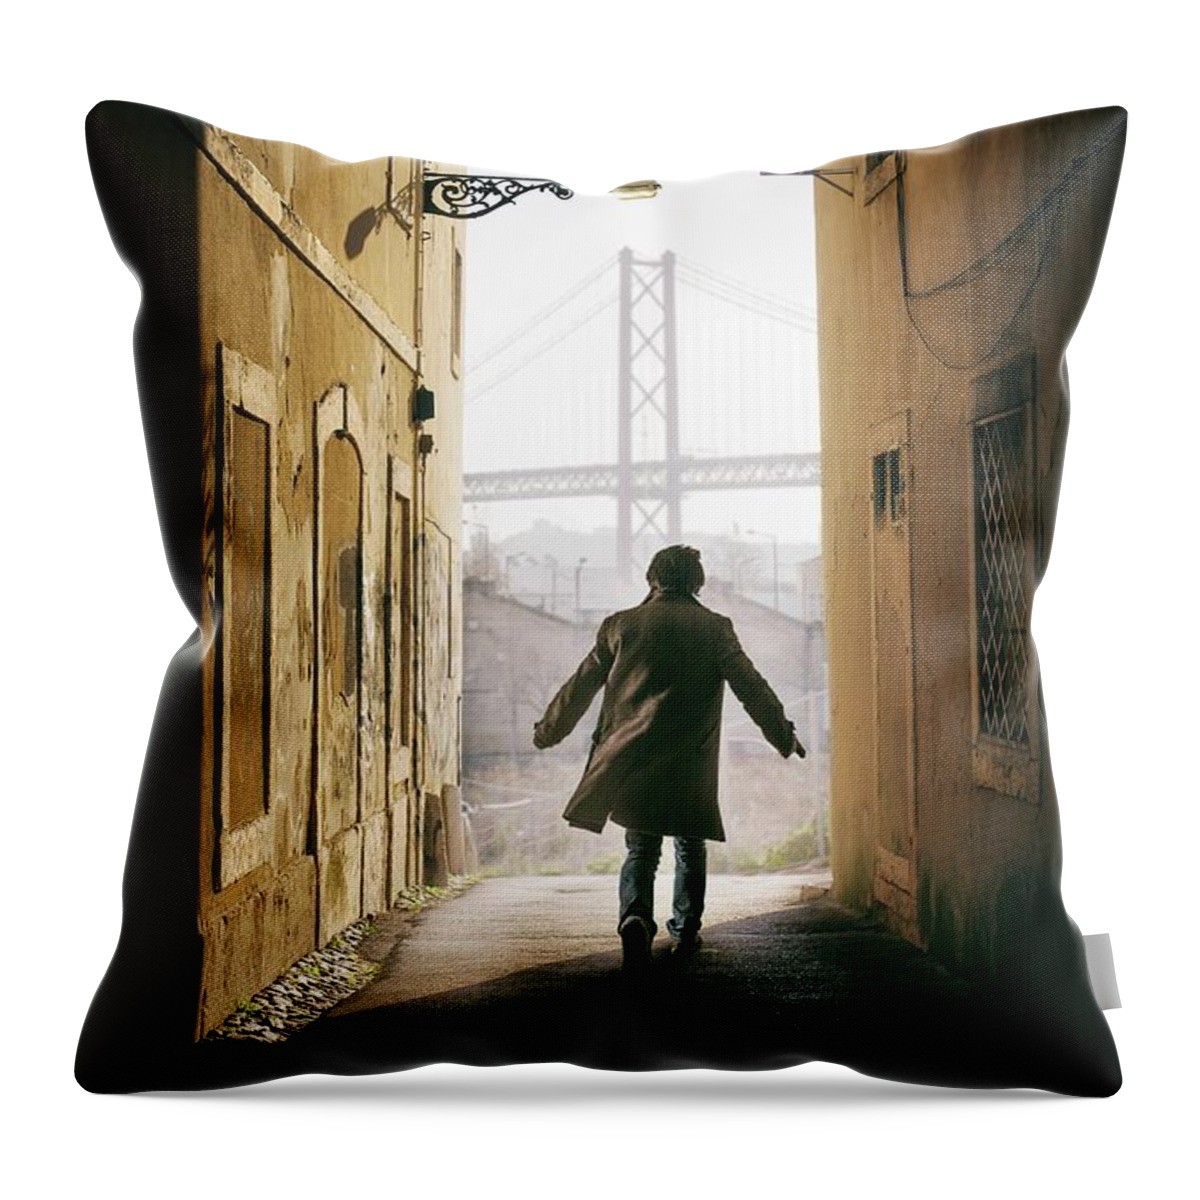 Alleyway Throw Pillow featuring the photograph Down The Alley by Carlos Caetano